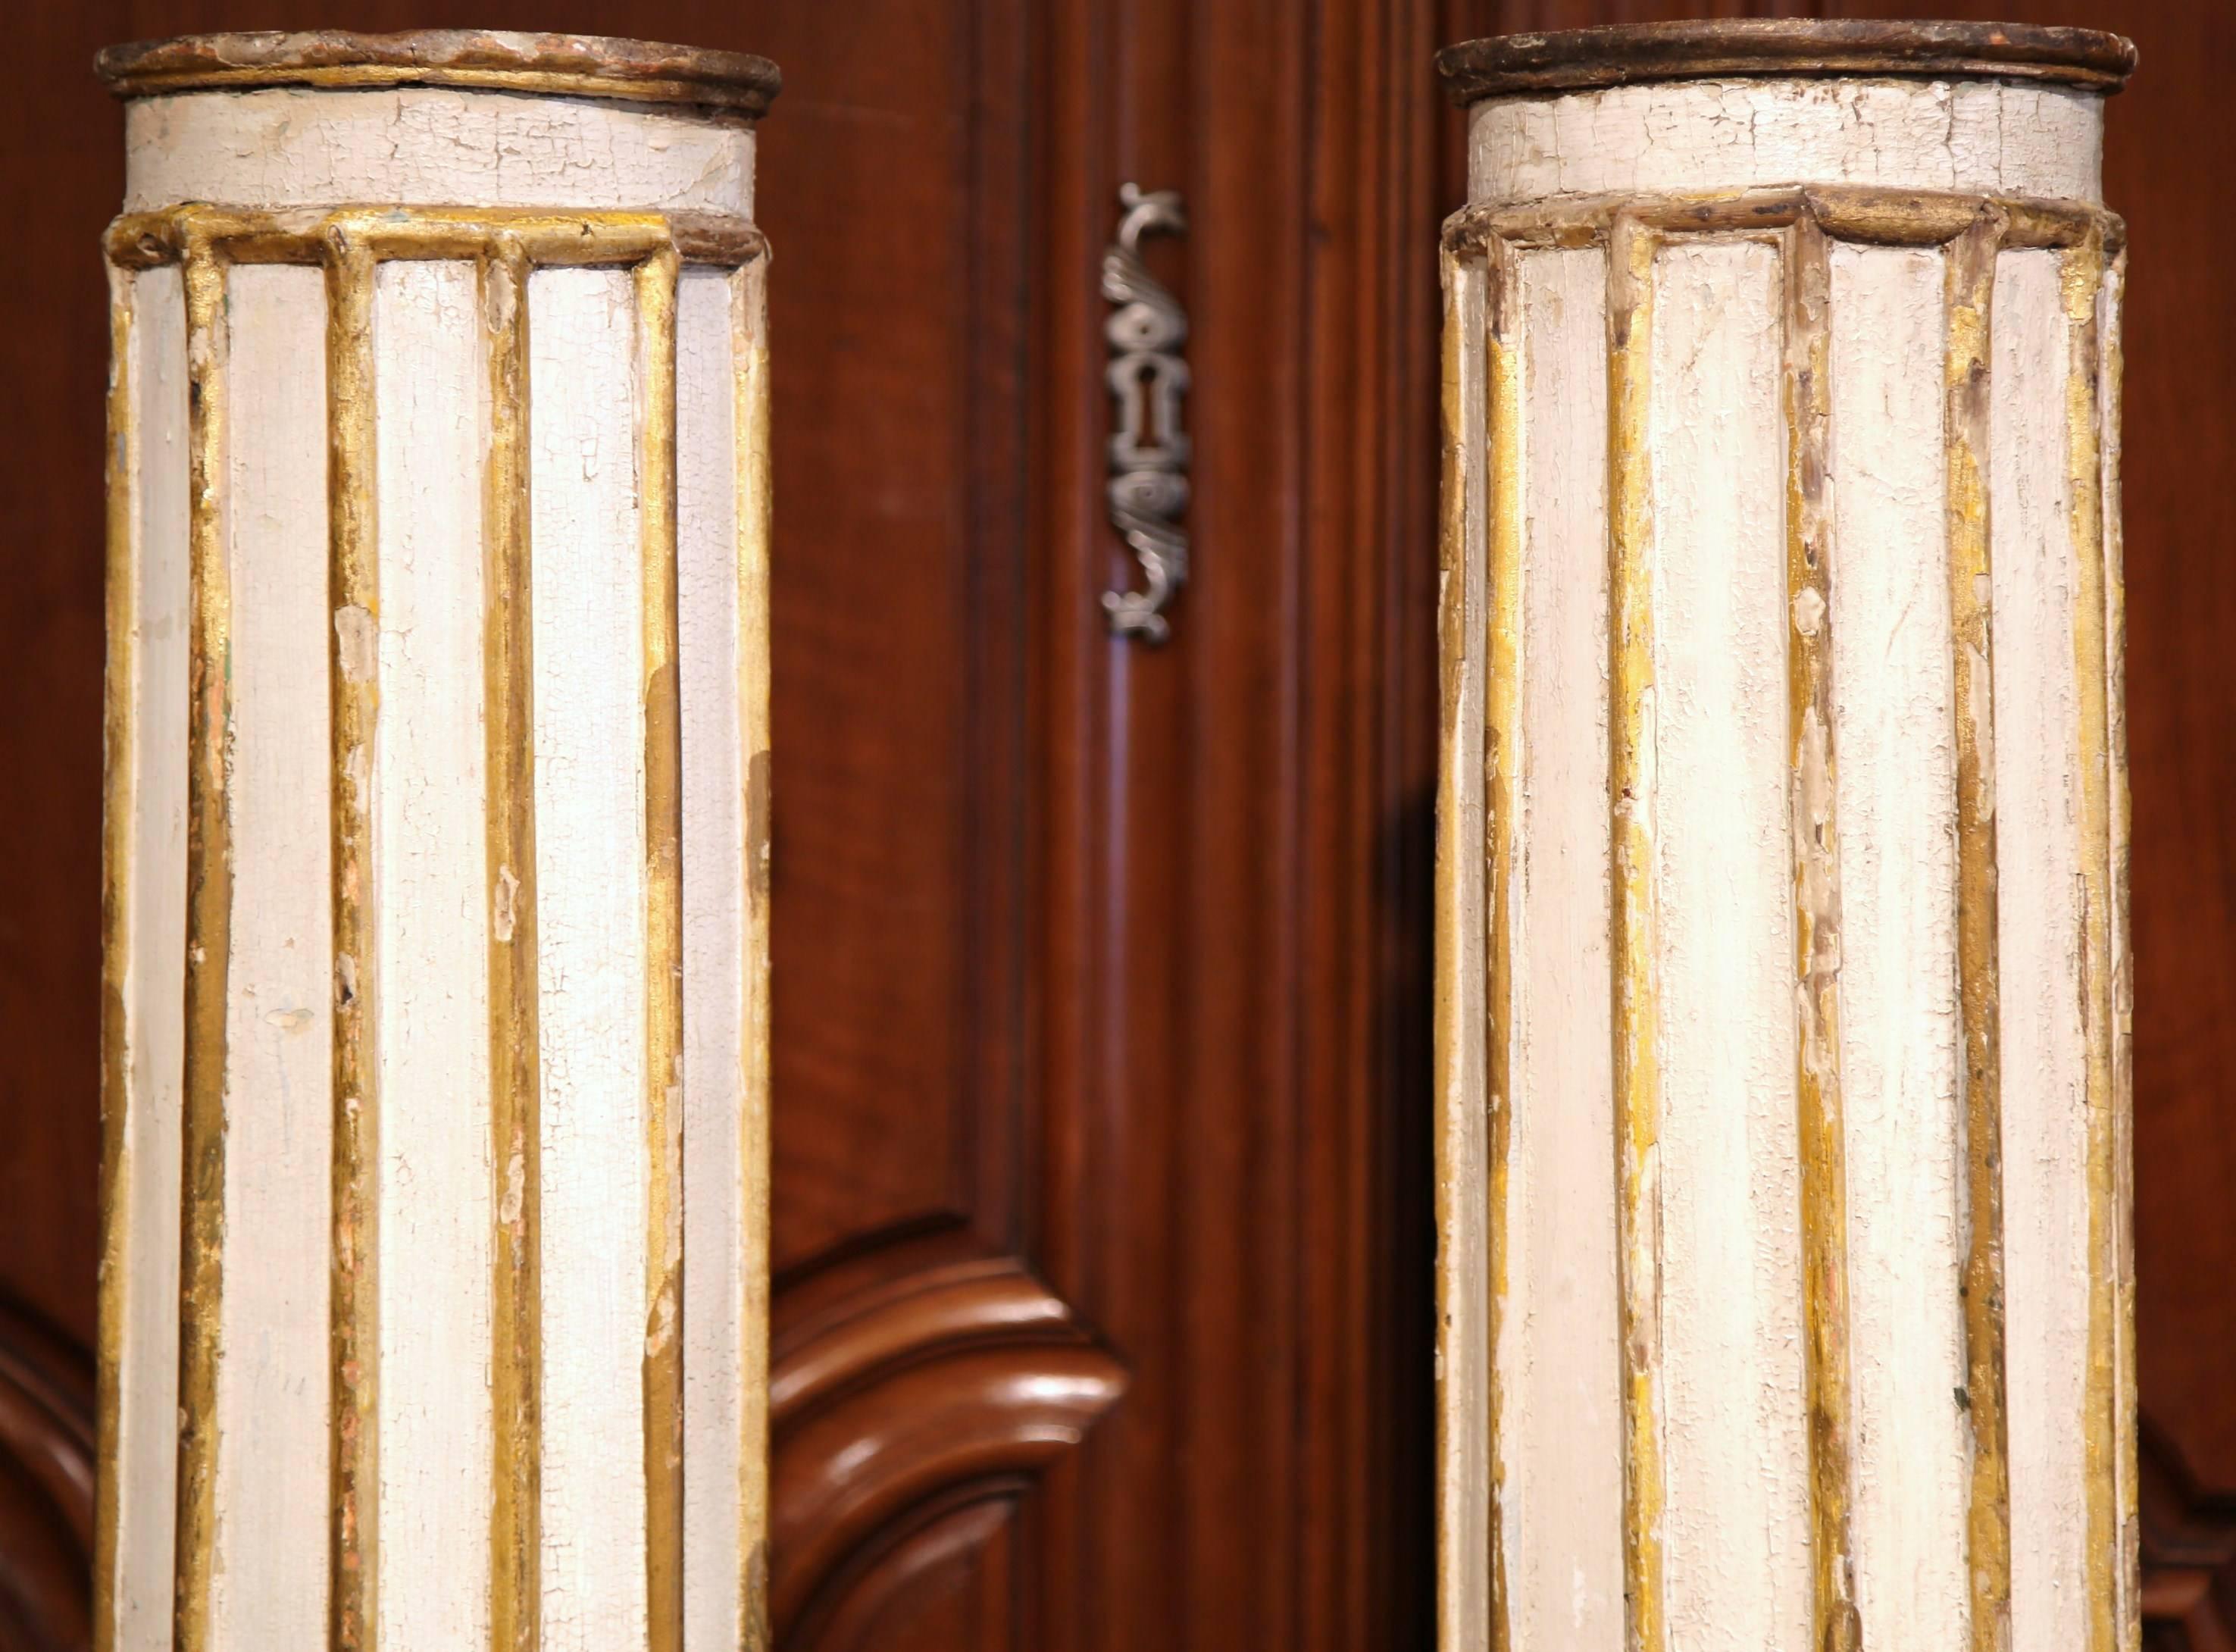 This elegant pair of architectural columns were found in Versailles, France, circa 1680. Both of the classical pedestals are completely hand-carved from inside out, for a beautiful, ornate effect. The tall columns feature their original painted